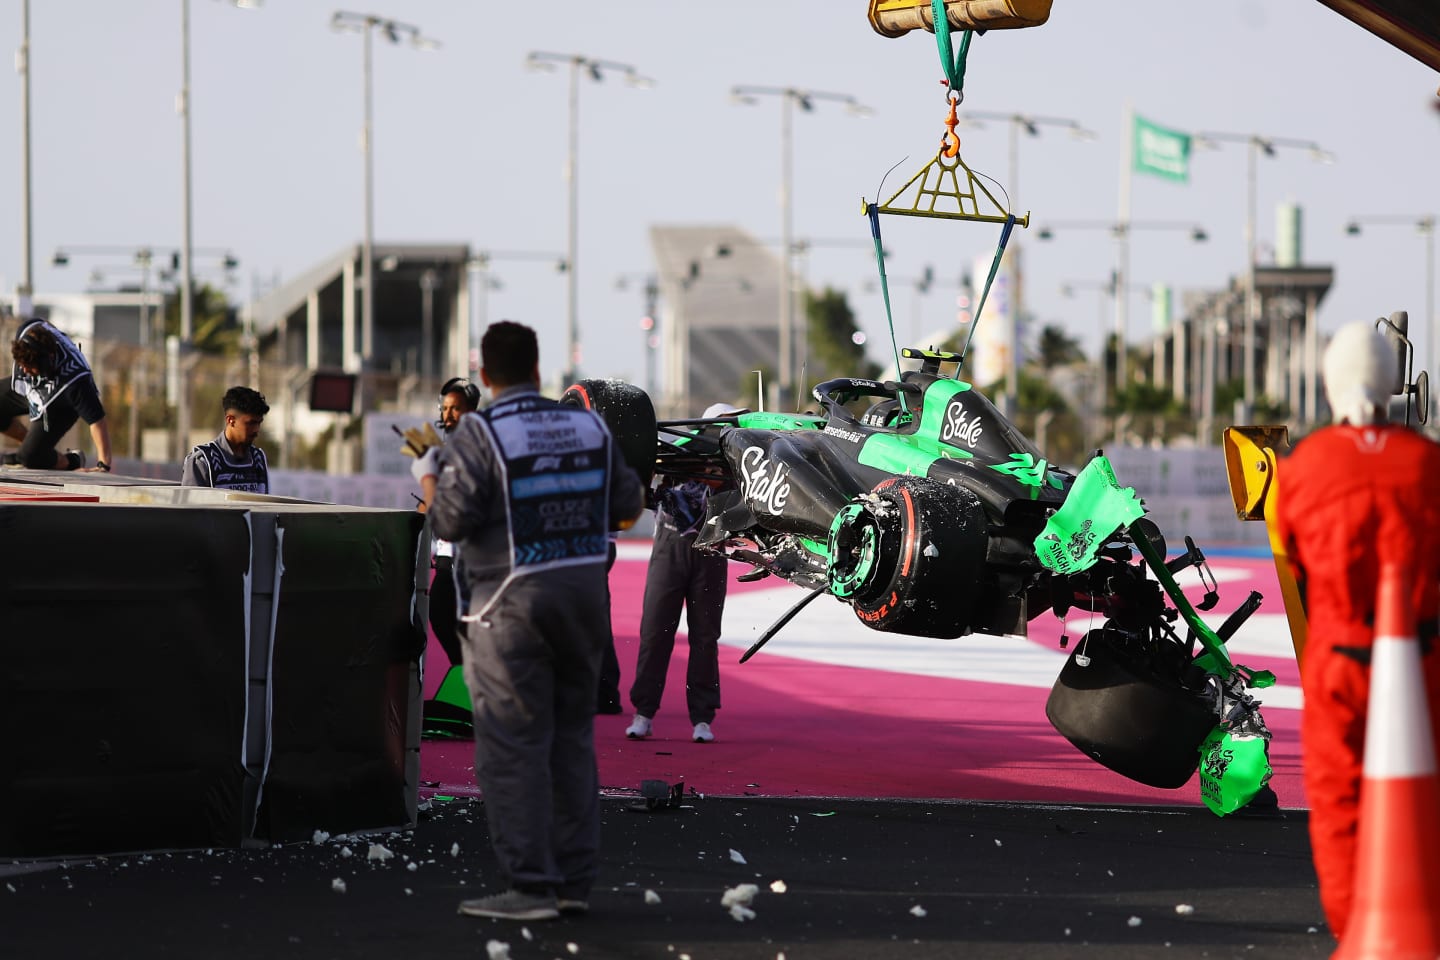 JEDDAH, SAUDI ARABIA - MARCH 08: The car of Zhou Guanyu of China and Stake F1 Team Kick Sauber is removed from the circuit after a crash causing a red flag during final practice ahead of the F1 Grand Prix of Saudi Arabia at Jeddah Corniche Circuit on March 08, 2024 in Jeddah, Saudi Arabia. (Photo by Joe Portlock - Formula 1/Formula 1 via Getty Images)